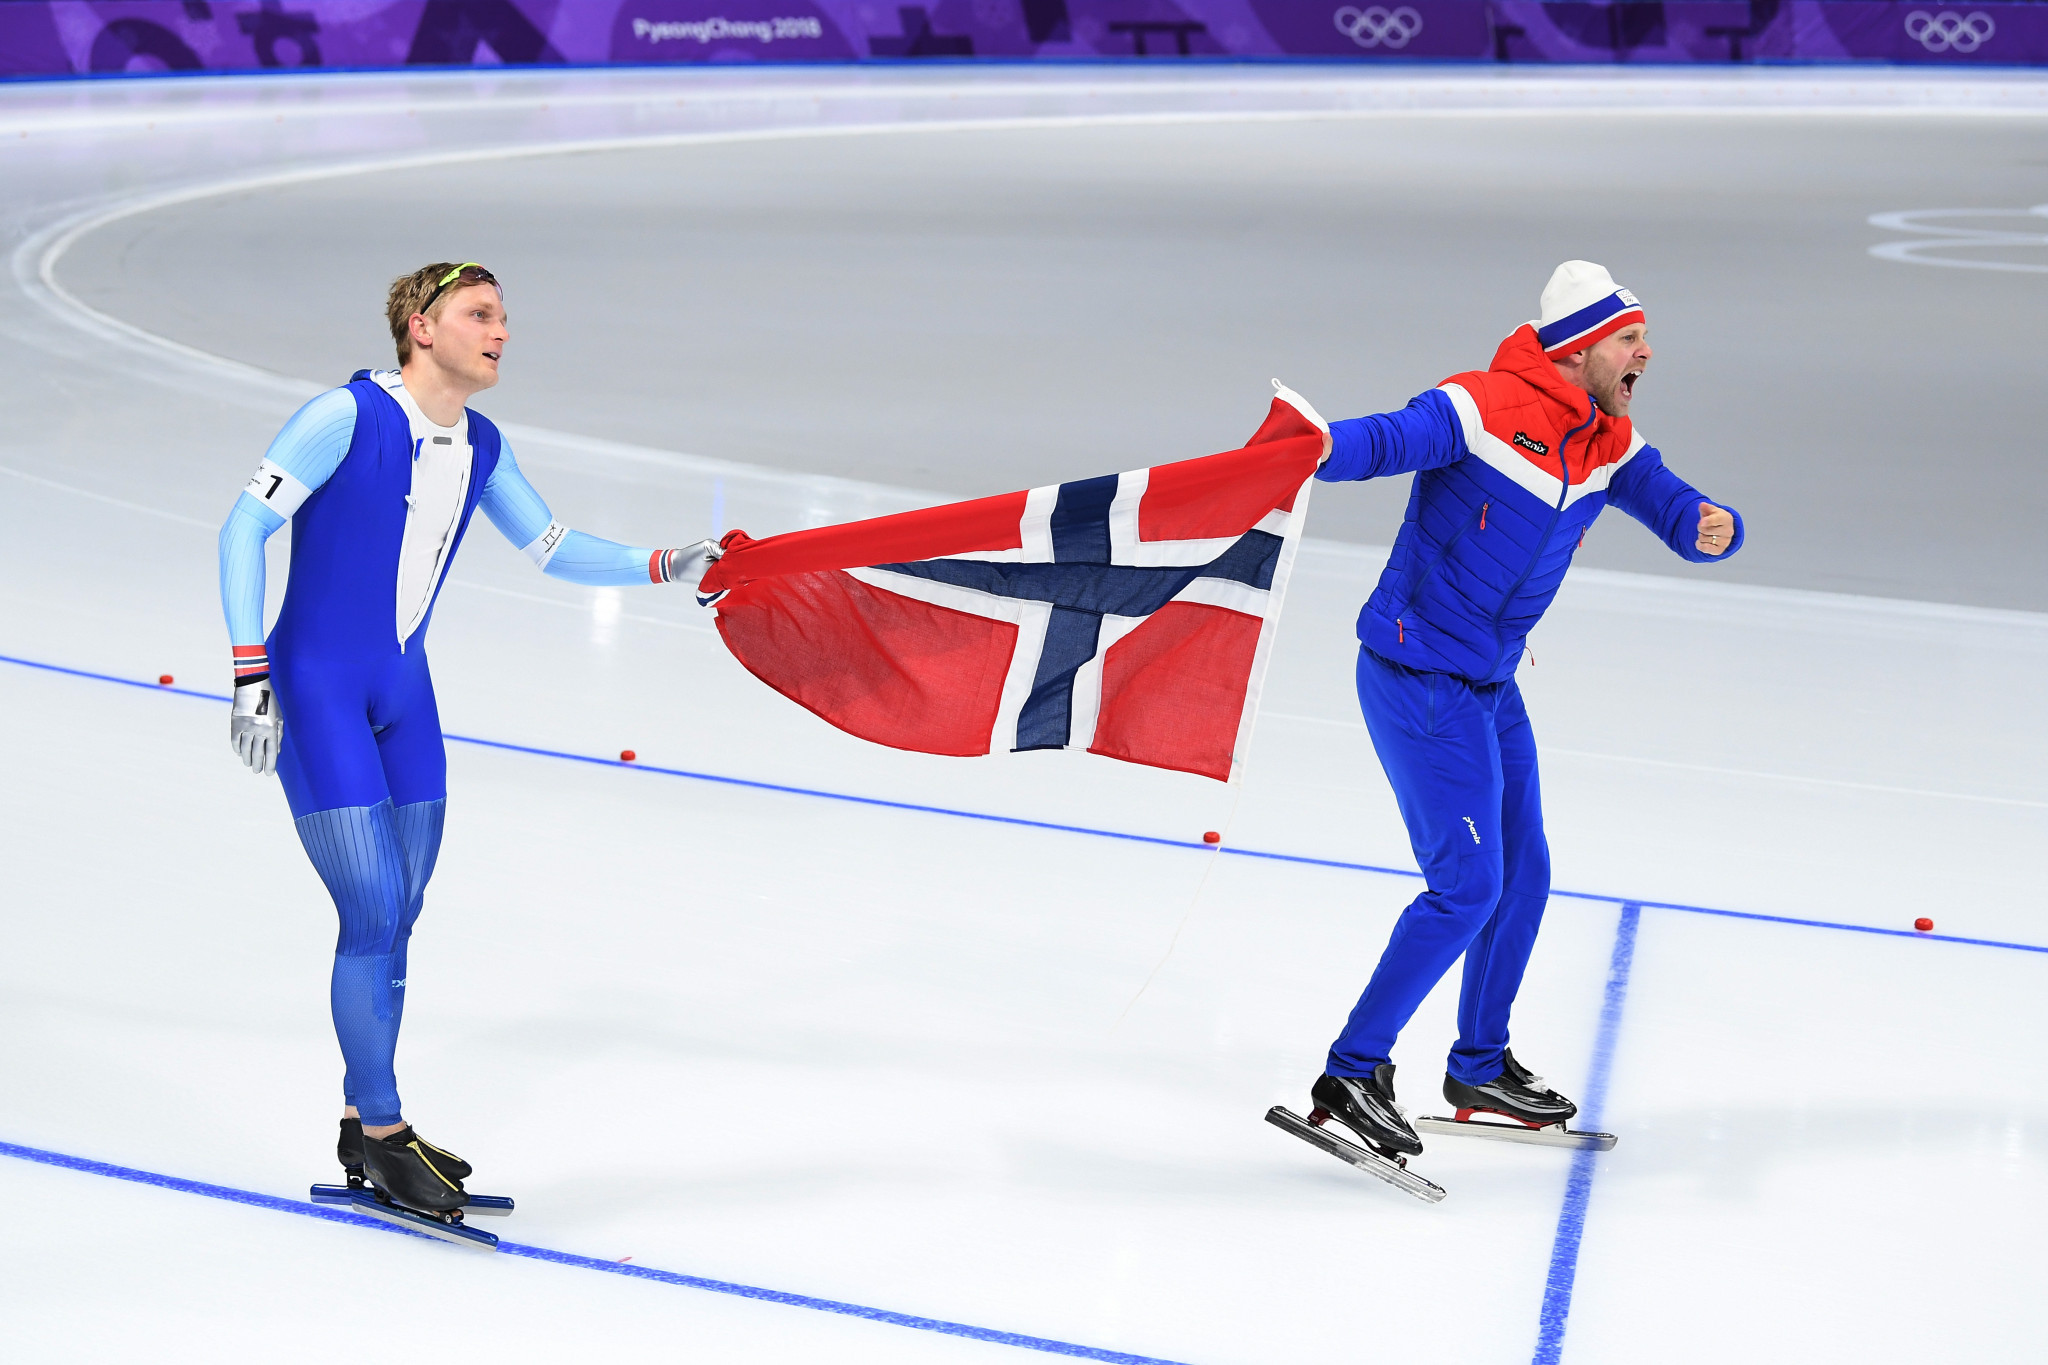 Norway enjoyed success in speed skating today at Pyeongchang 2018 ©Getty Images